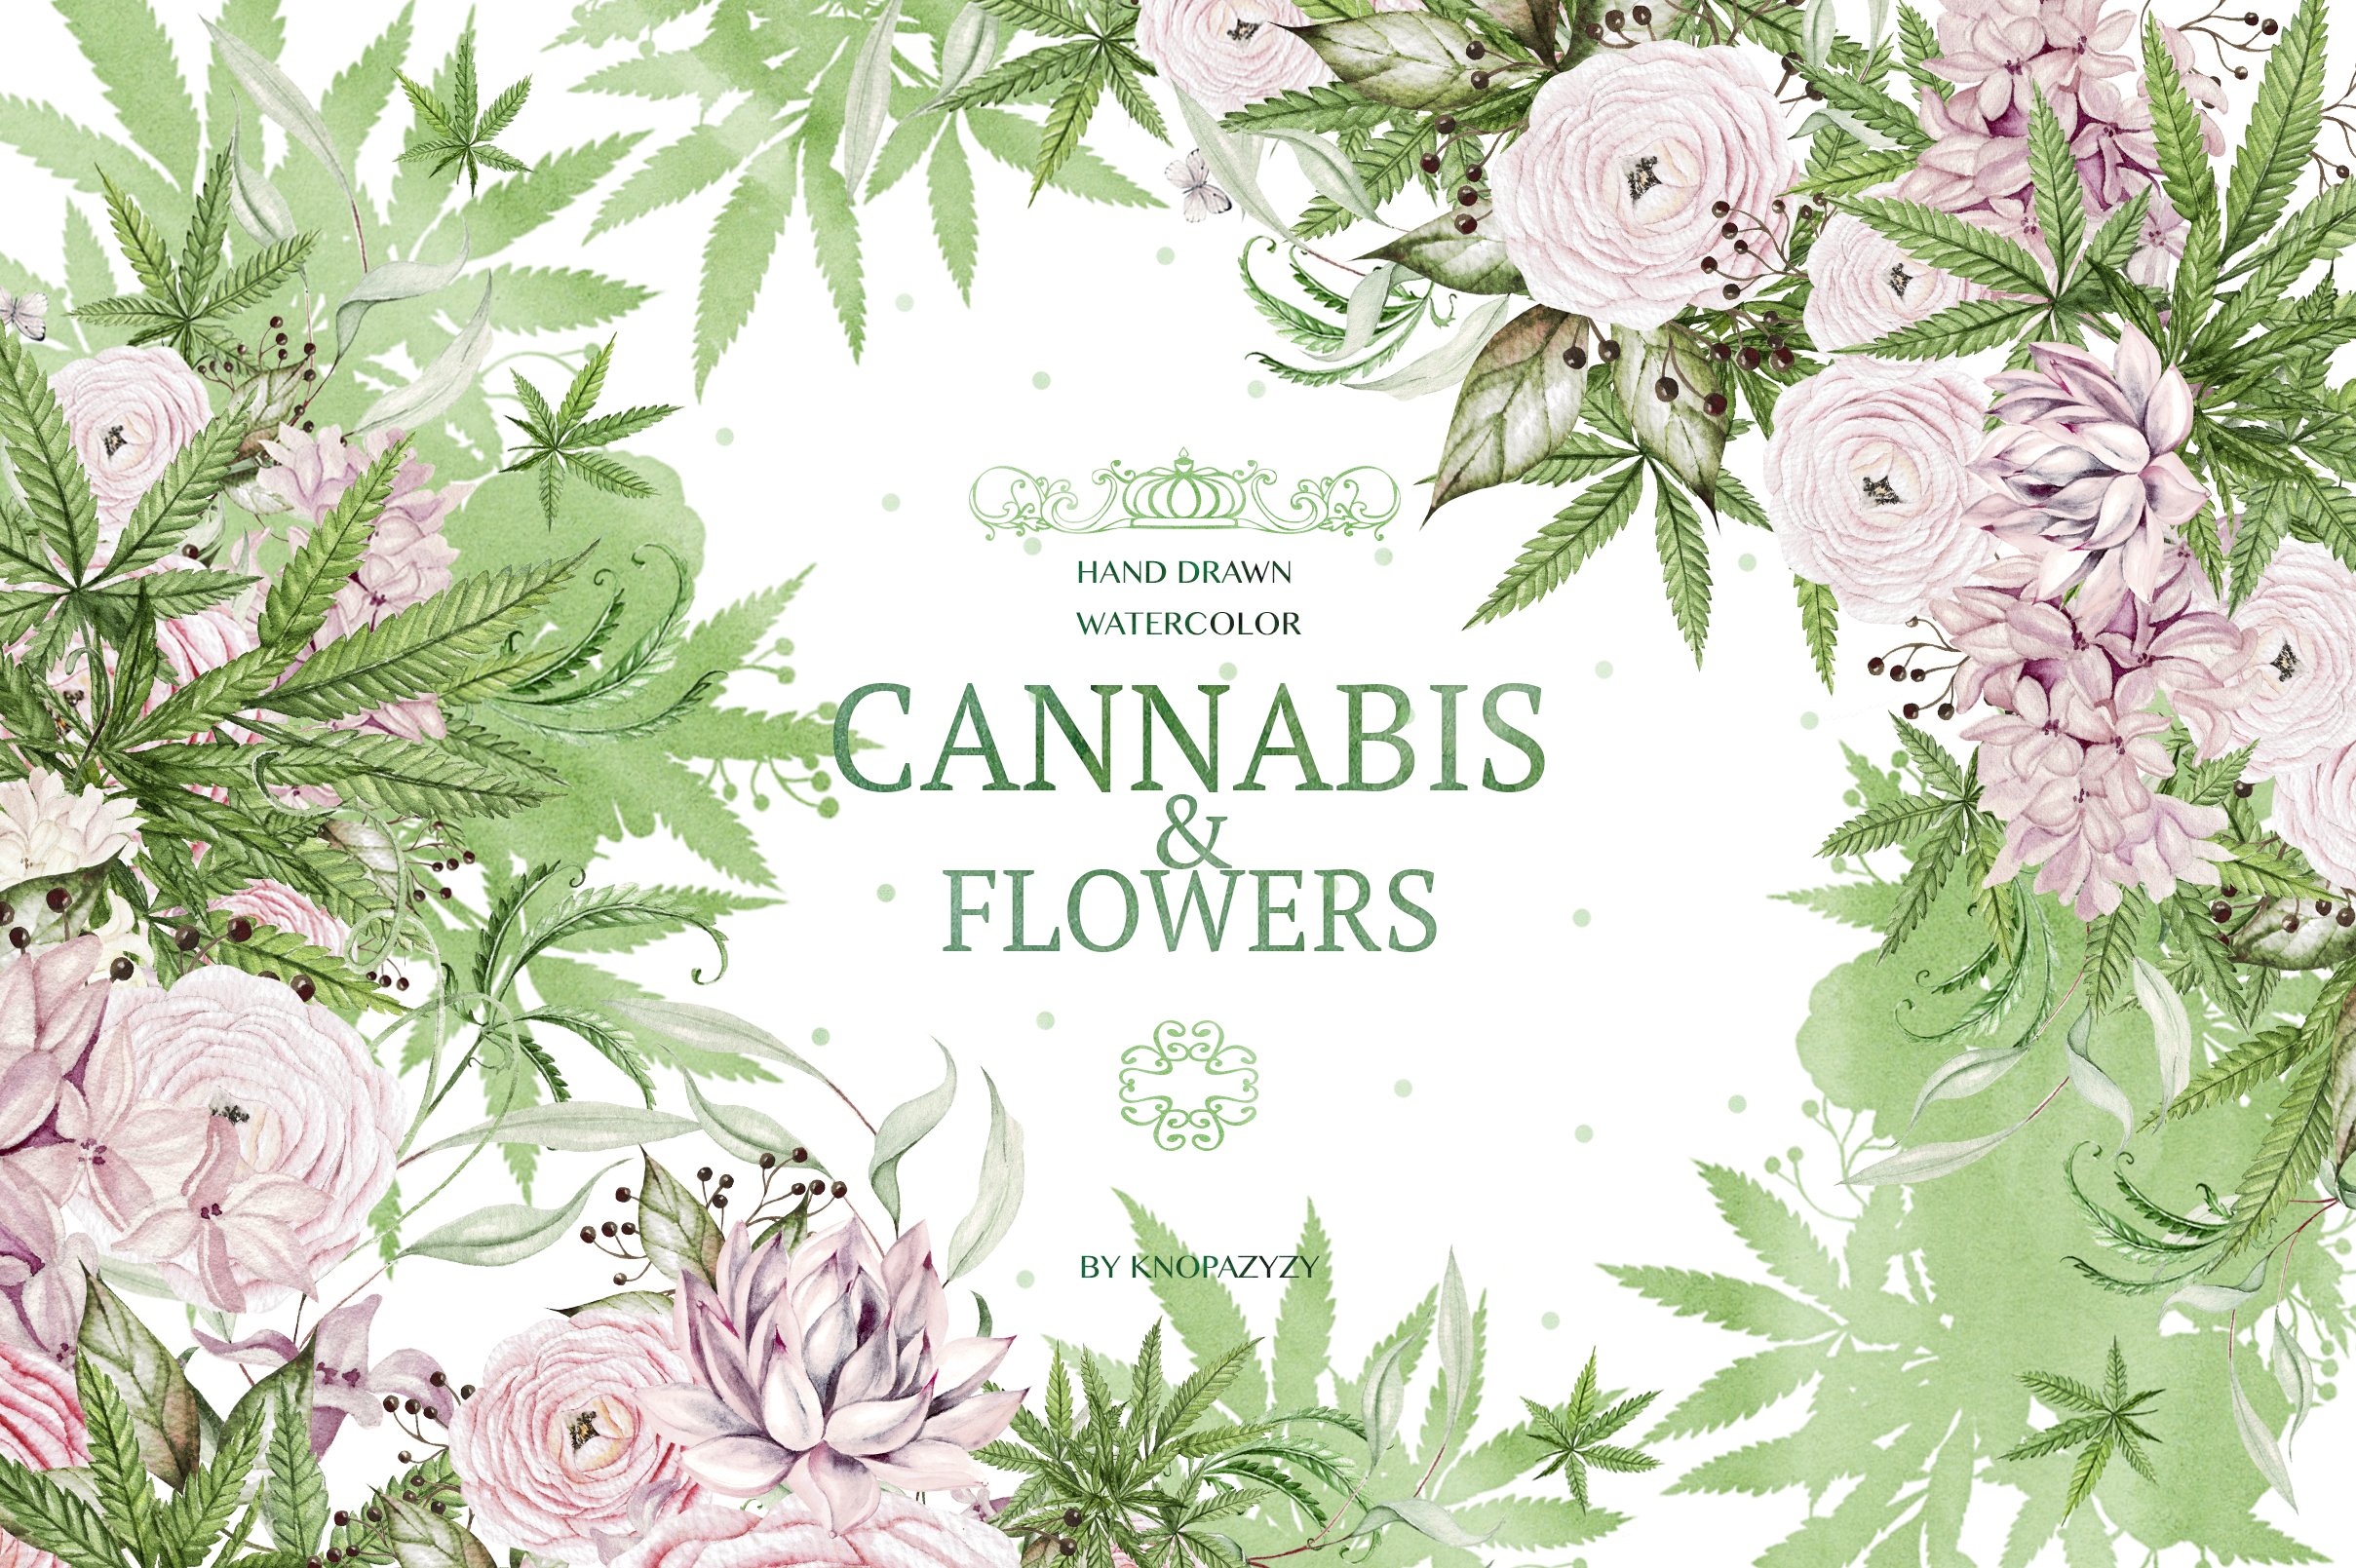 Cannabis & Flowers (Hand drawn watercolor).